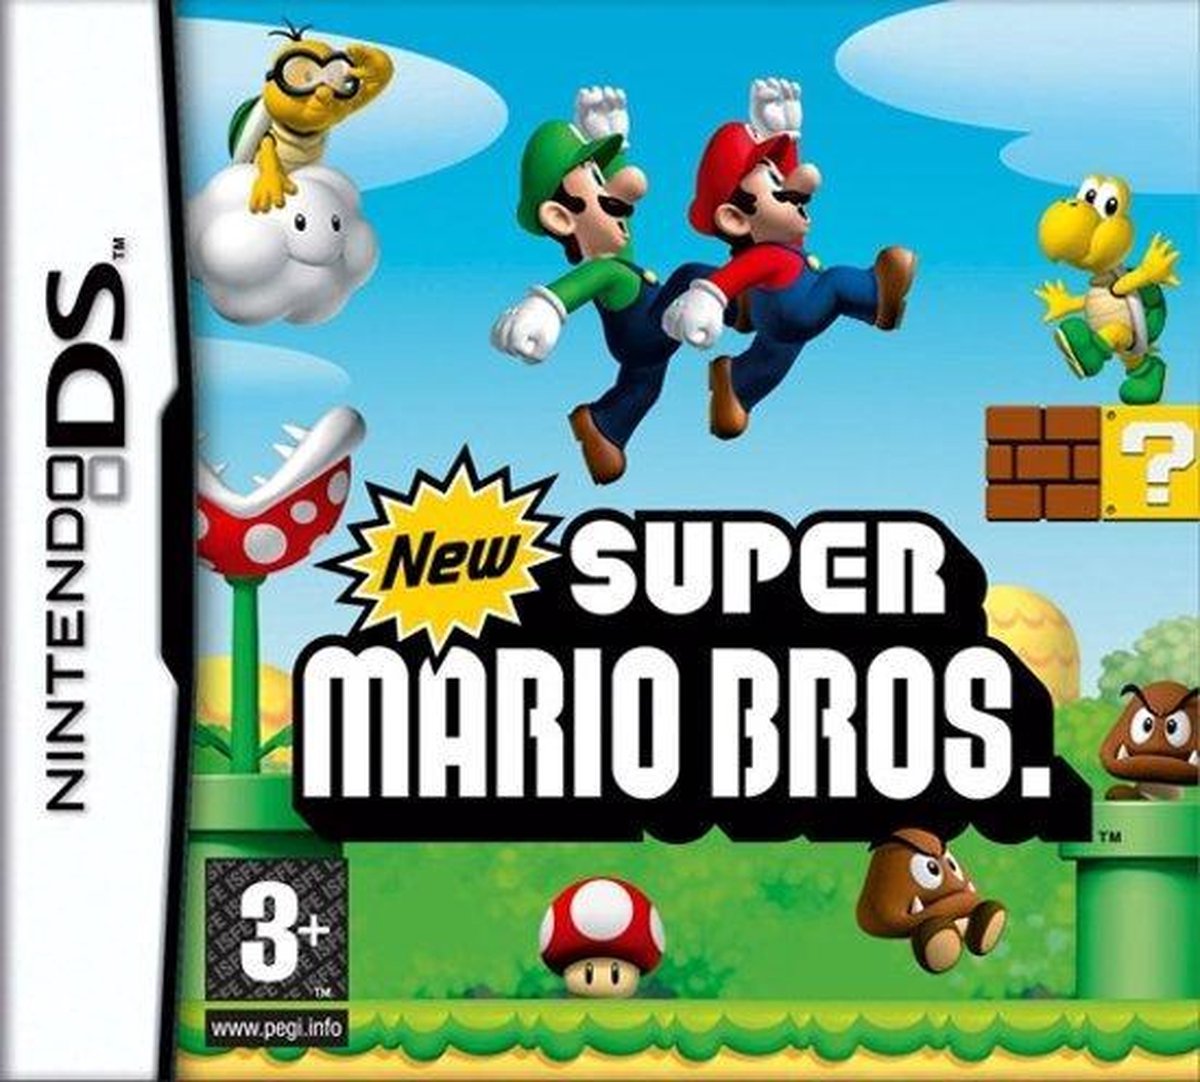 aanklager spanning attent New Super Mario Bros | Games | bol.com